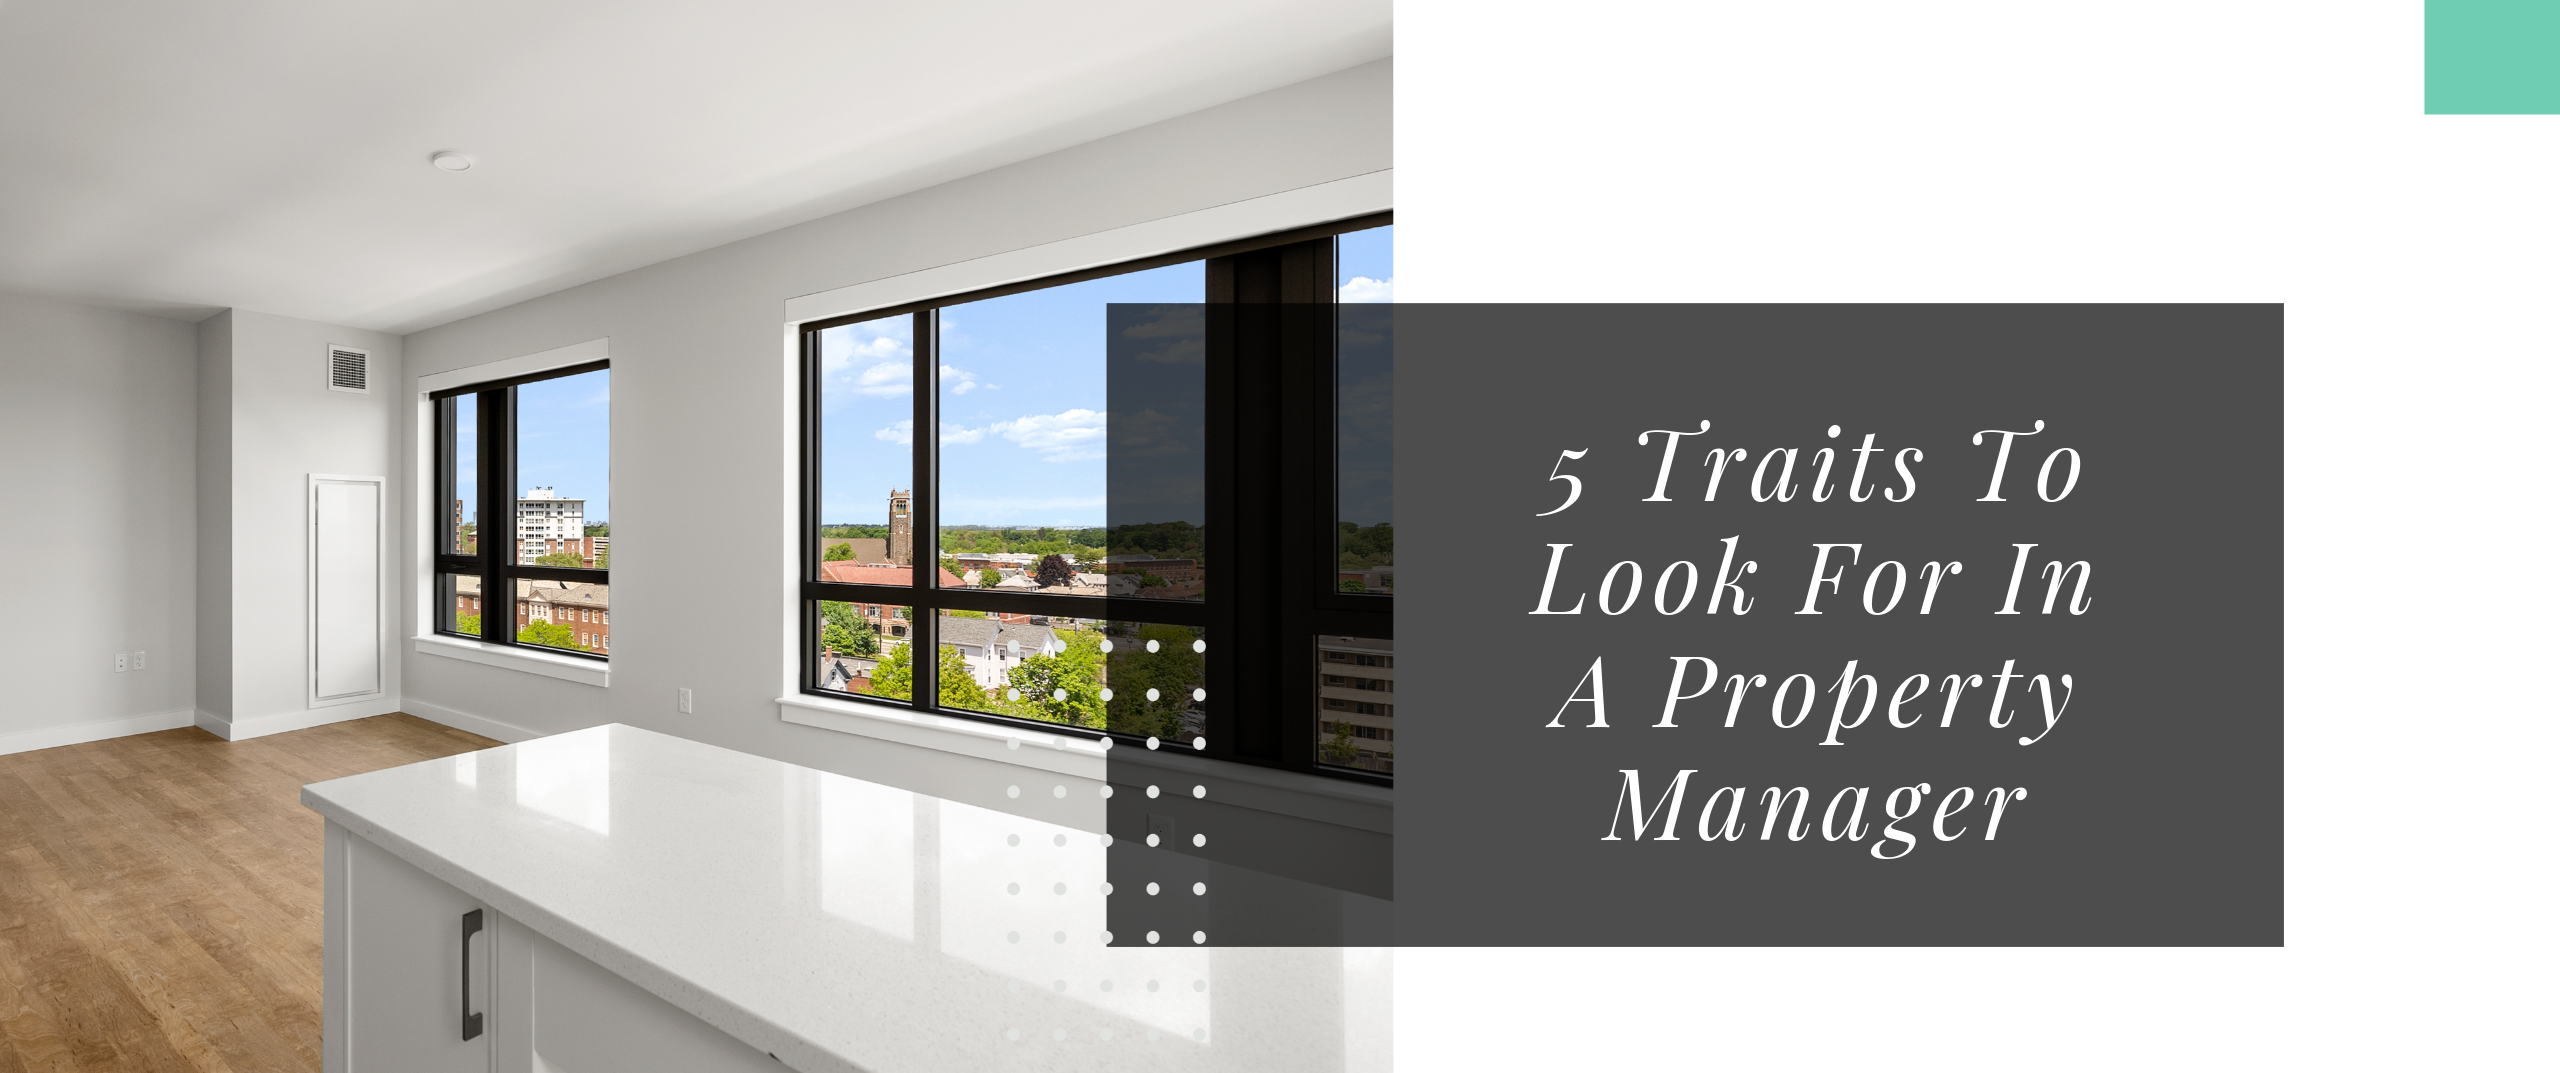 5 Traits To Look For In A Property Manager